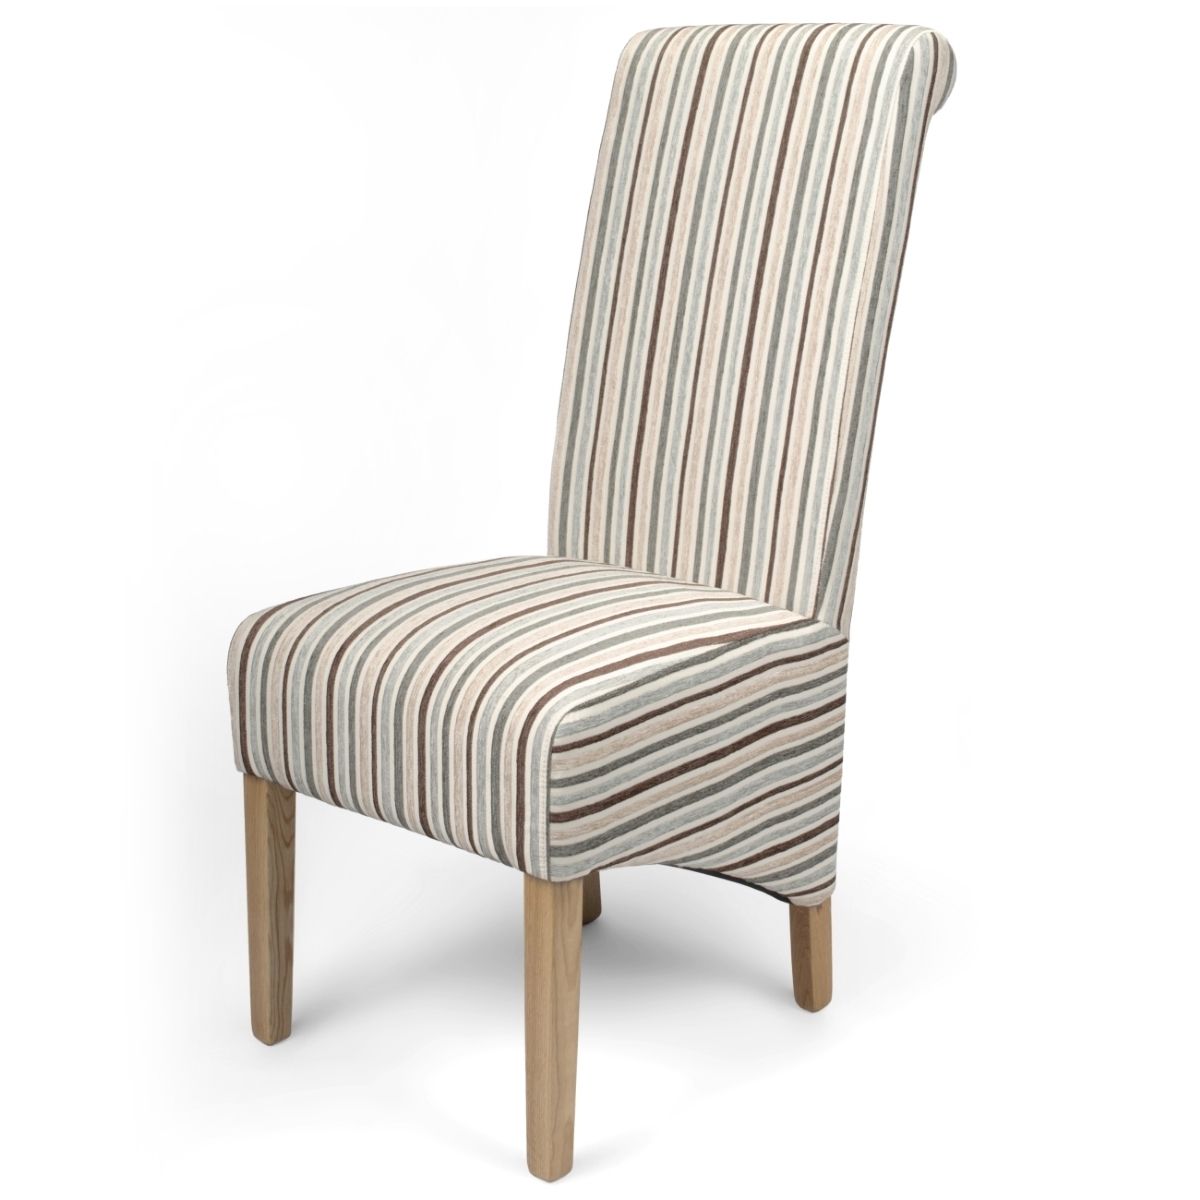 Blue Stripe Dining Chairs Within Most Recently Released Dining Chairs – Krista Stripe Dining Chairs In Duck Egg Blue (Photo 4 of 20)